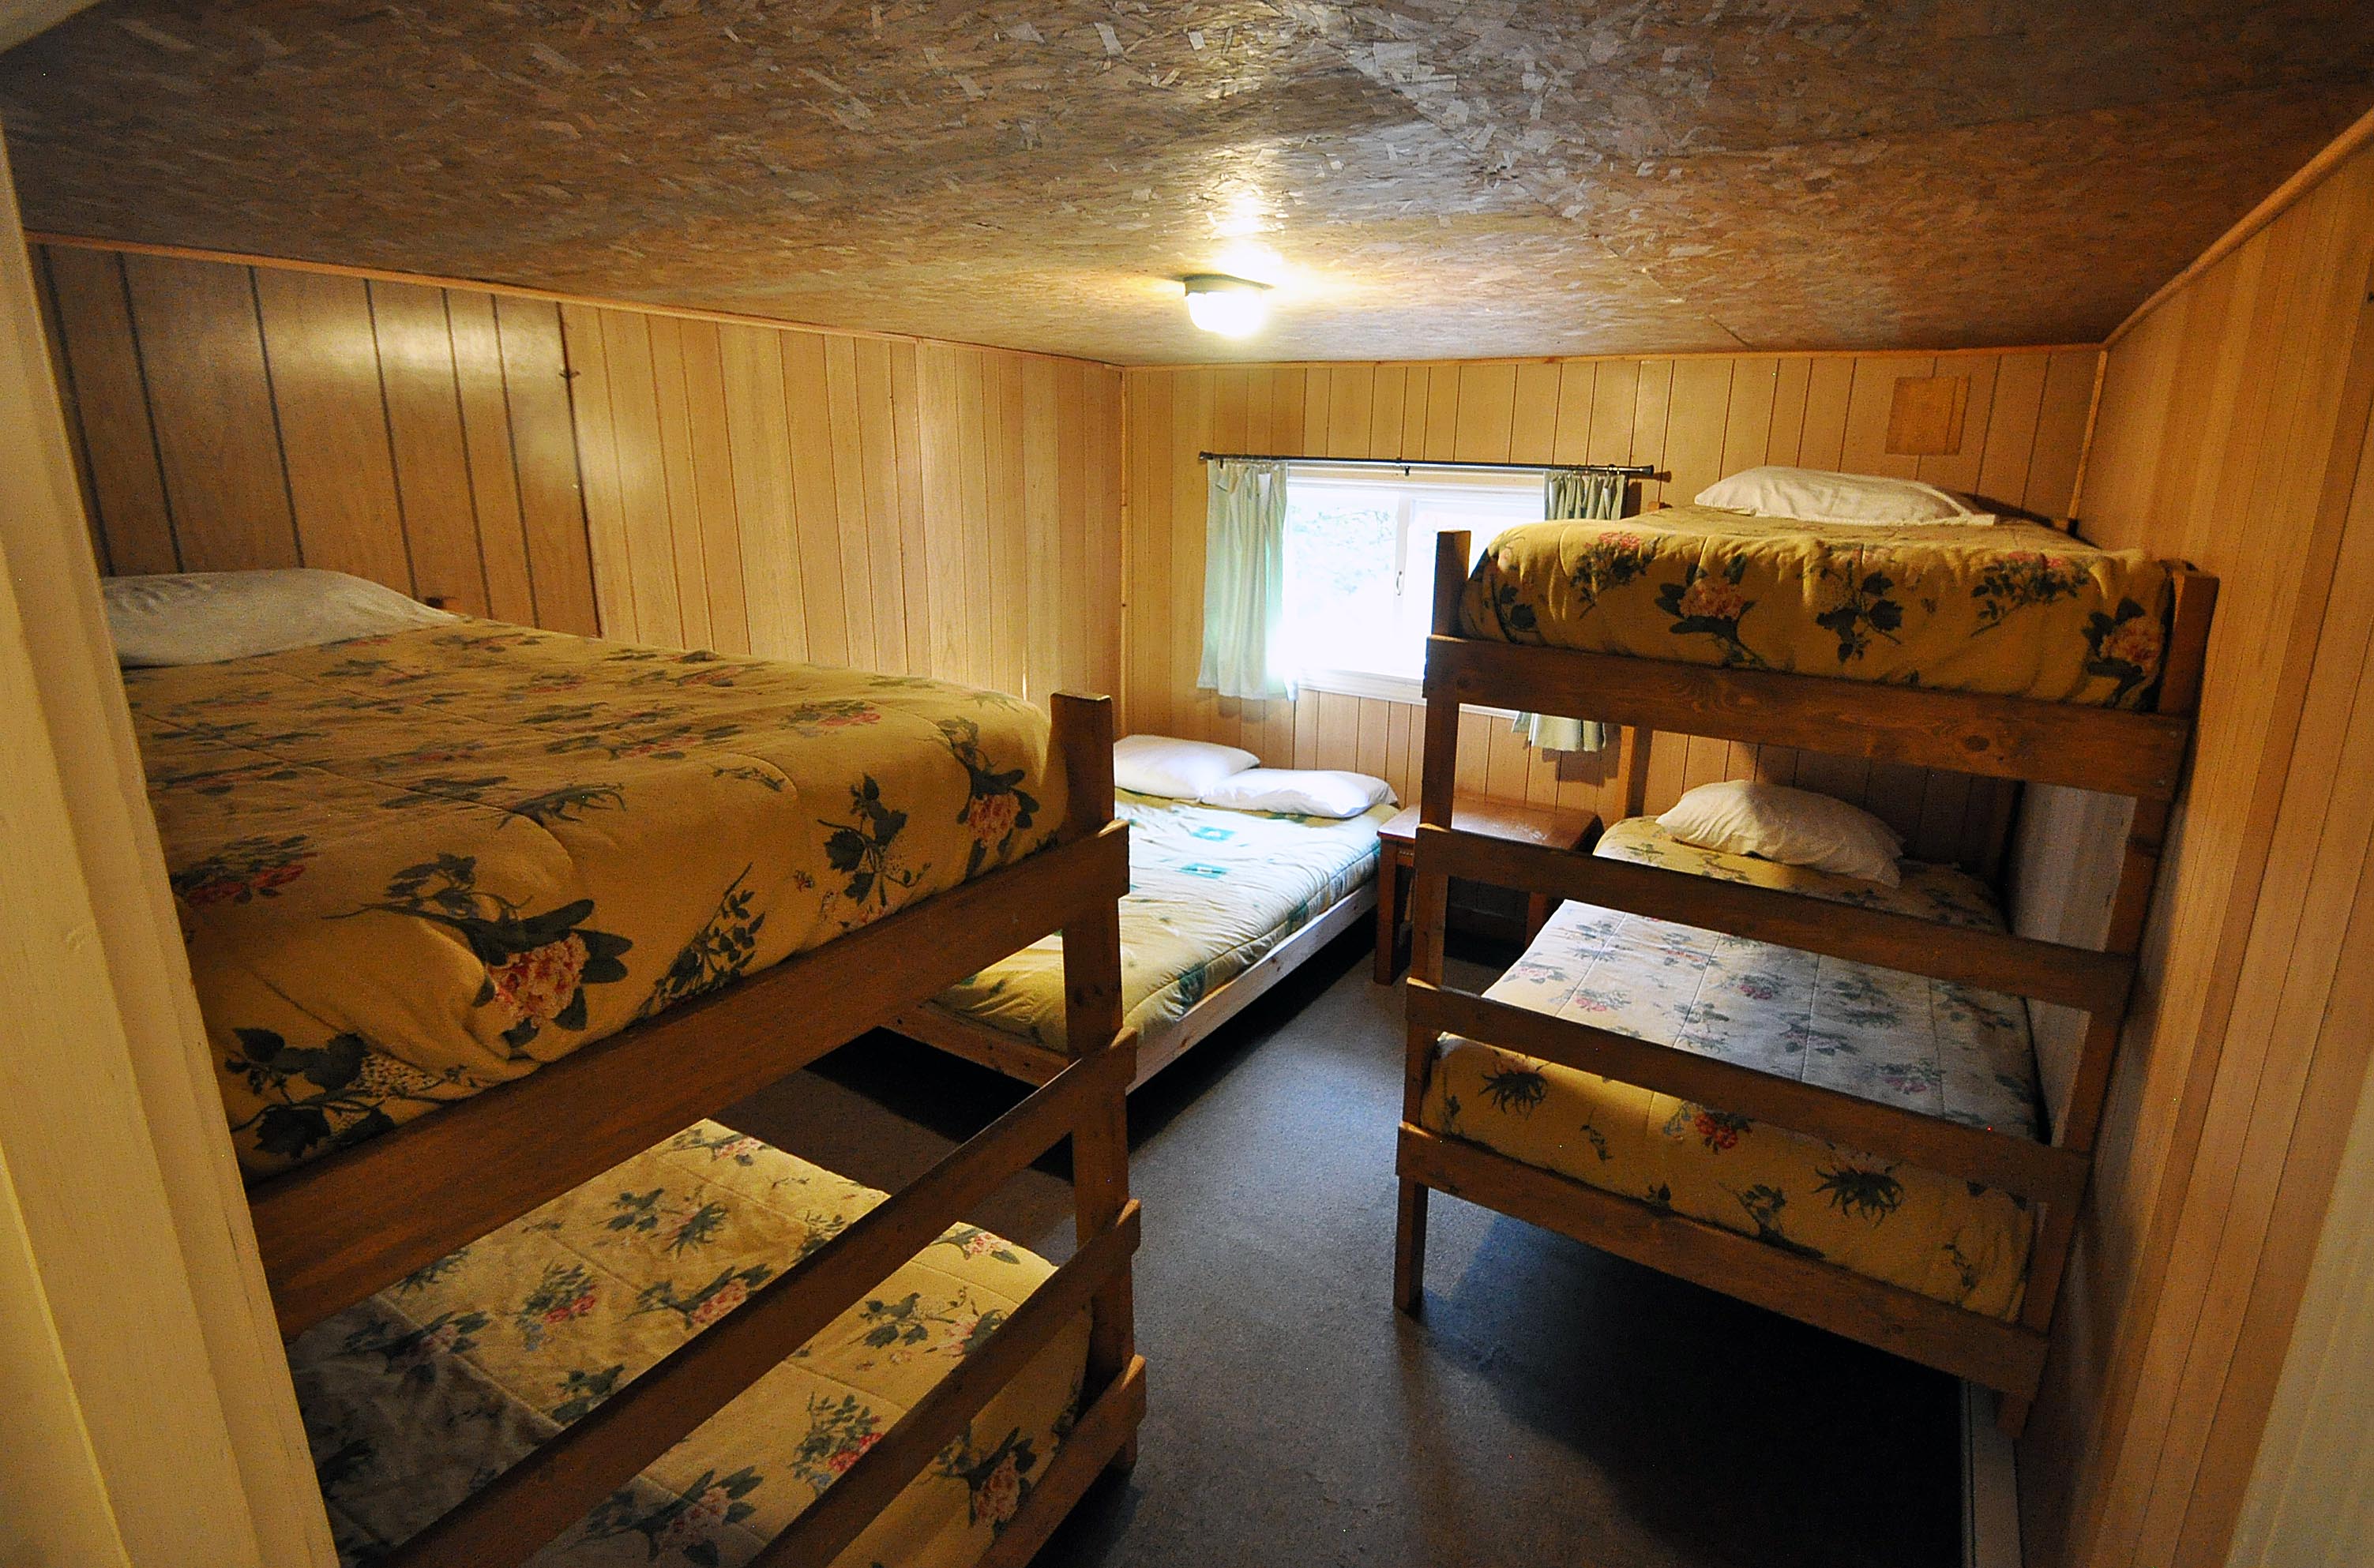 Cabin 15 - bedroom with two bunk beds and single bed.